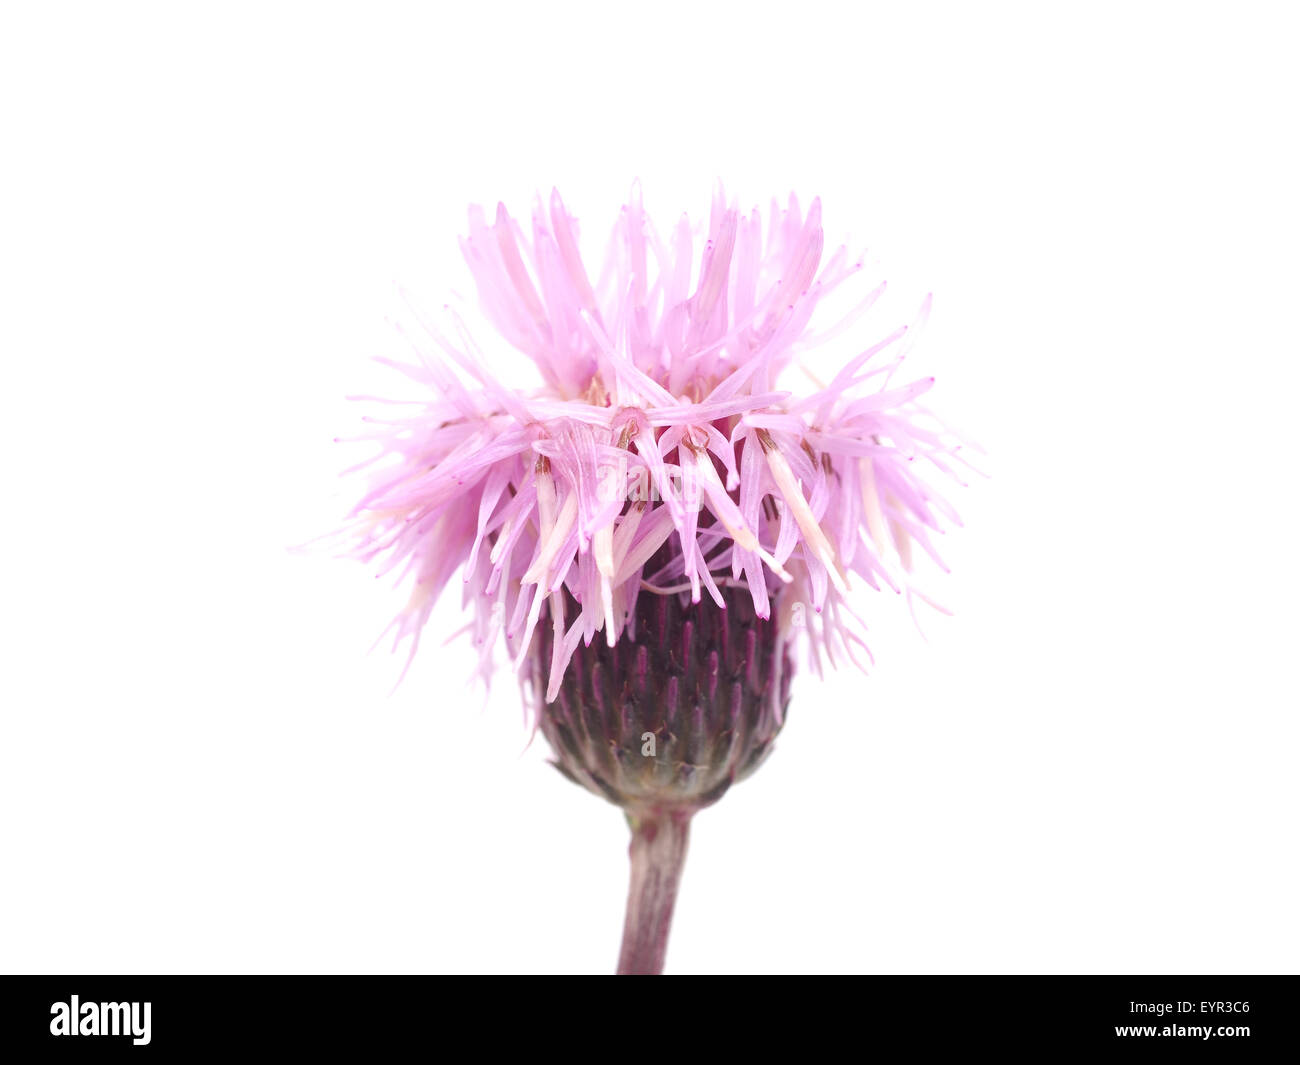 sow-thistle flowers on a white background Stock Photo